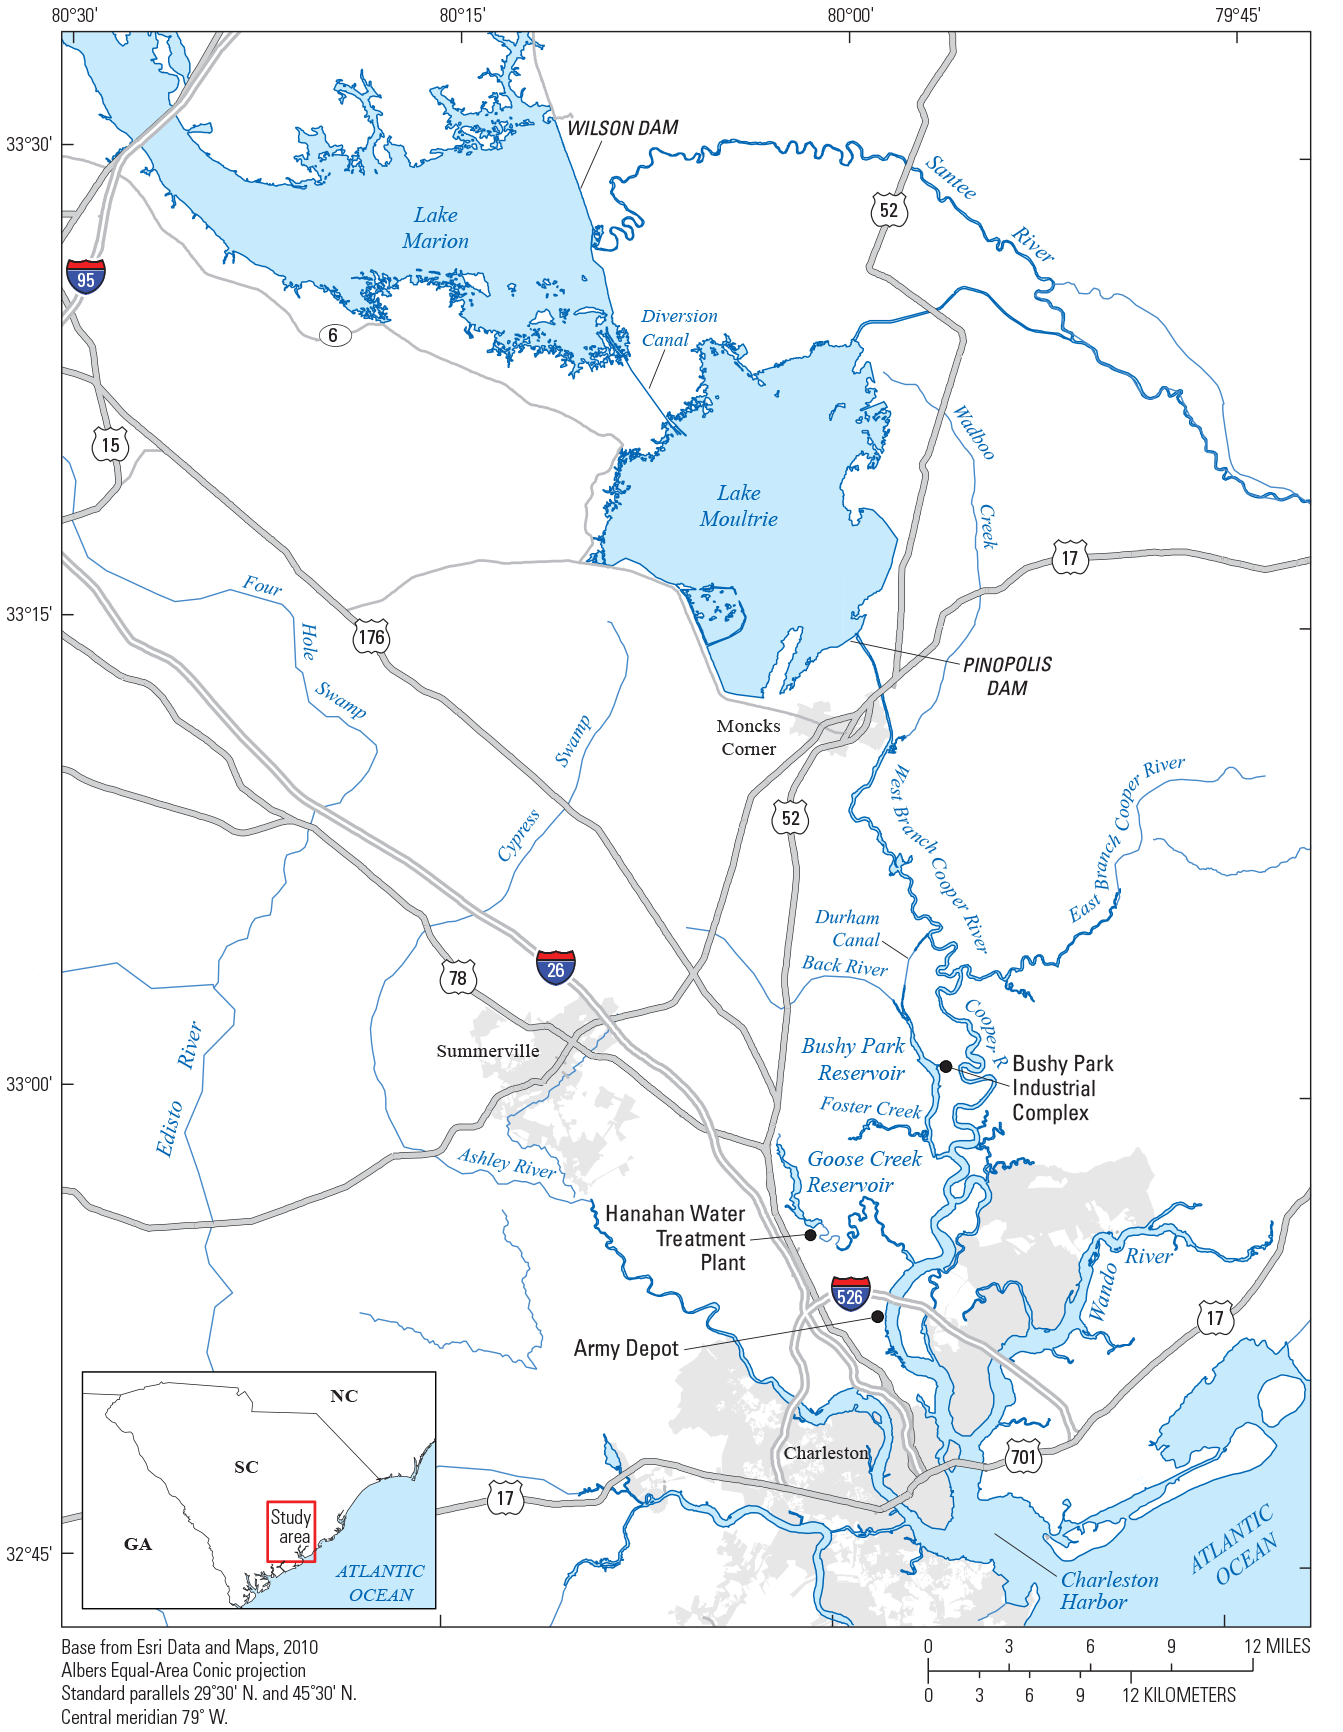 Map showing in study area in South Carolina, including Lakes Marion and Moultrie